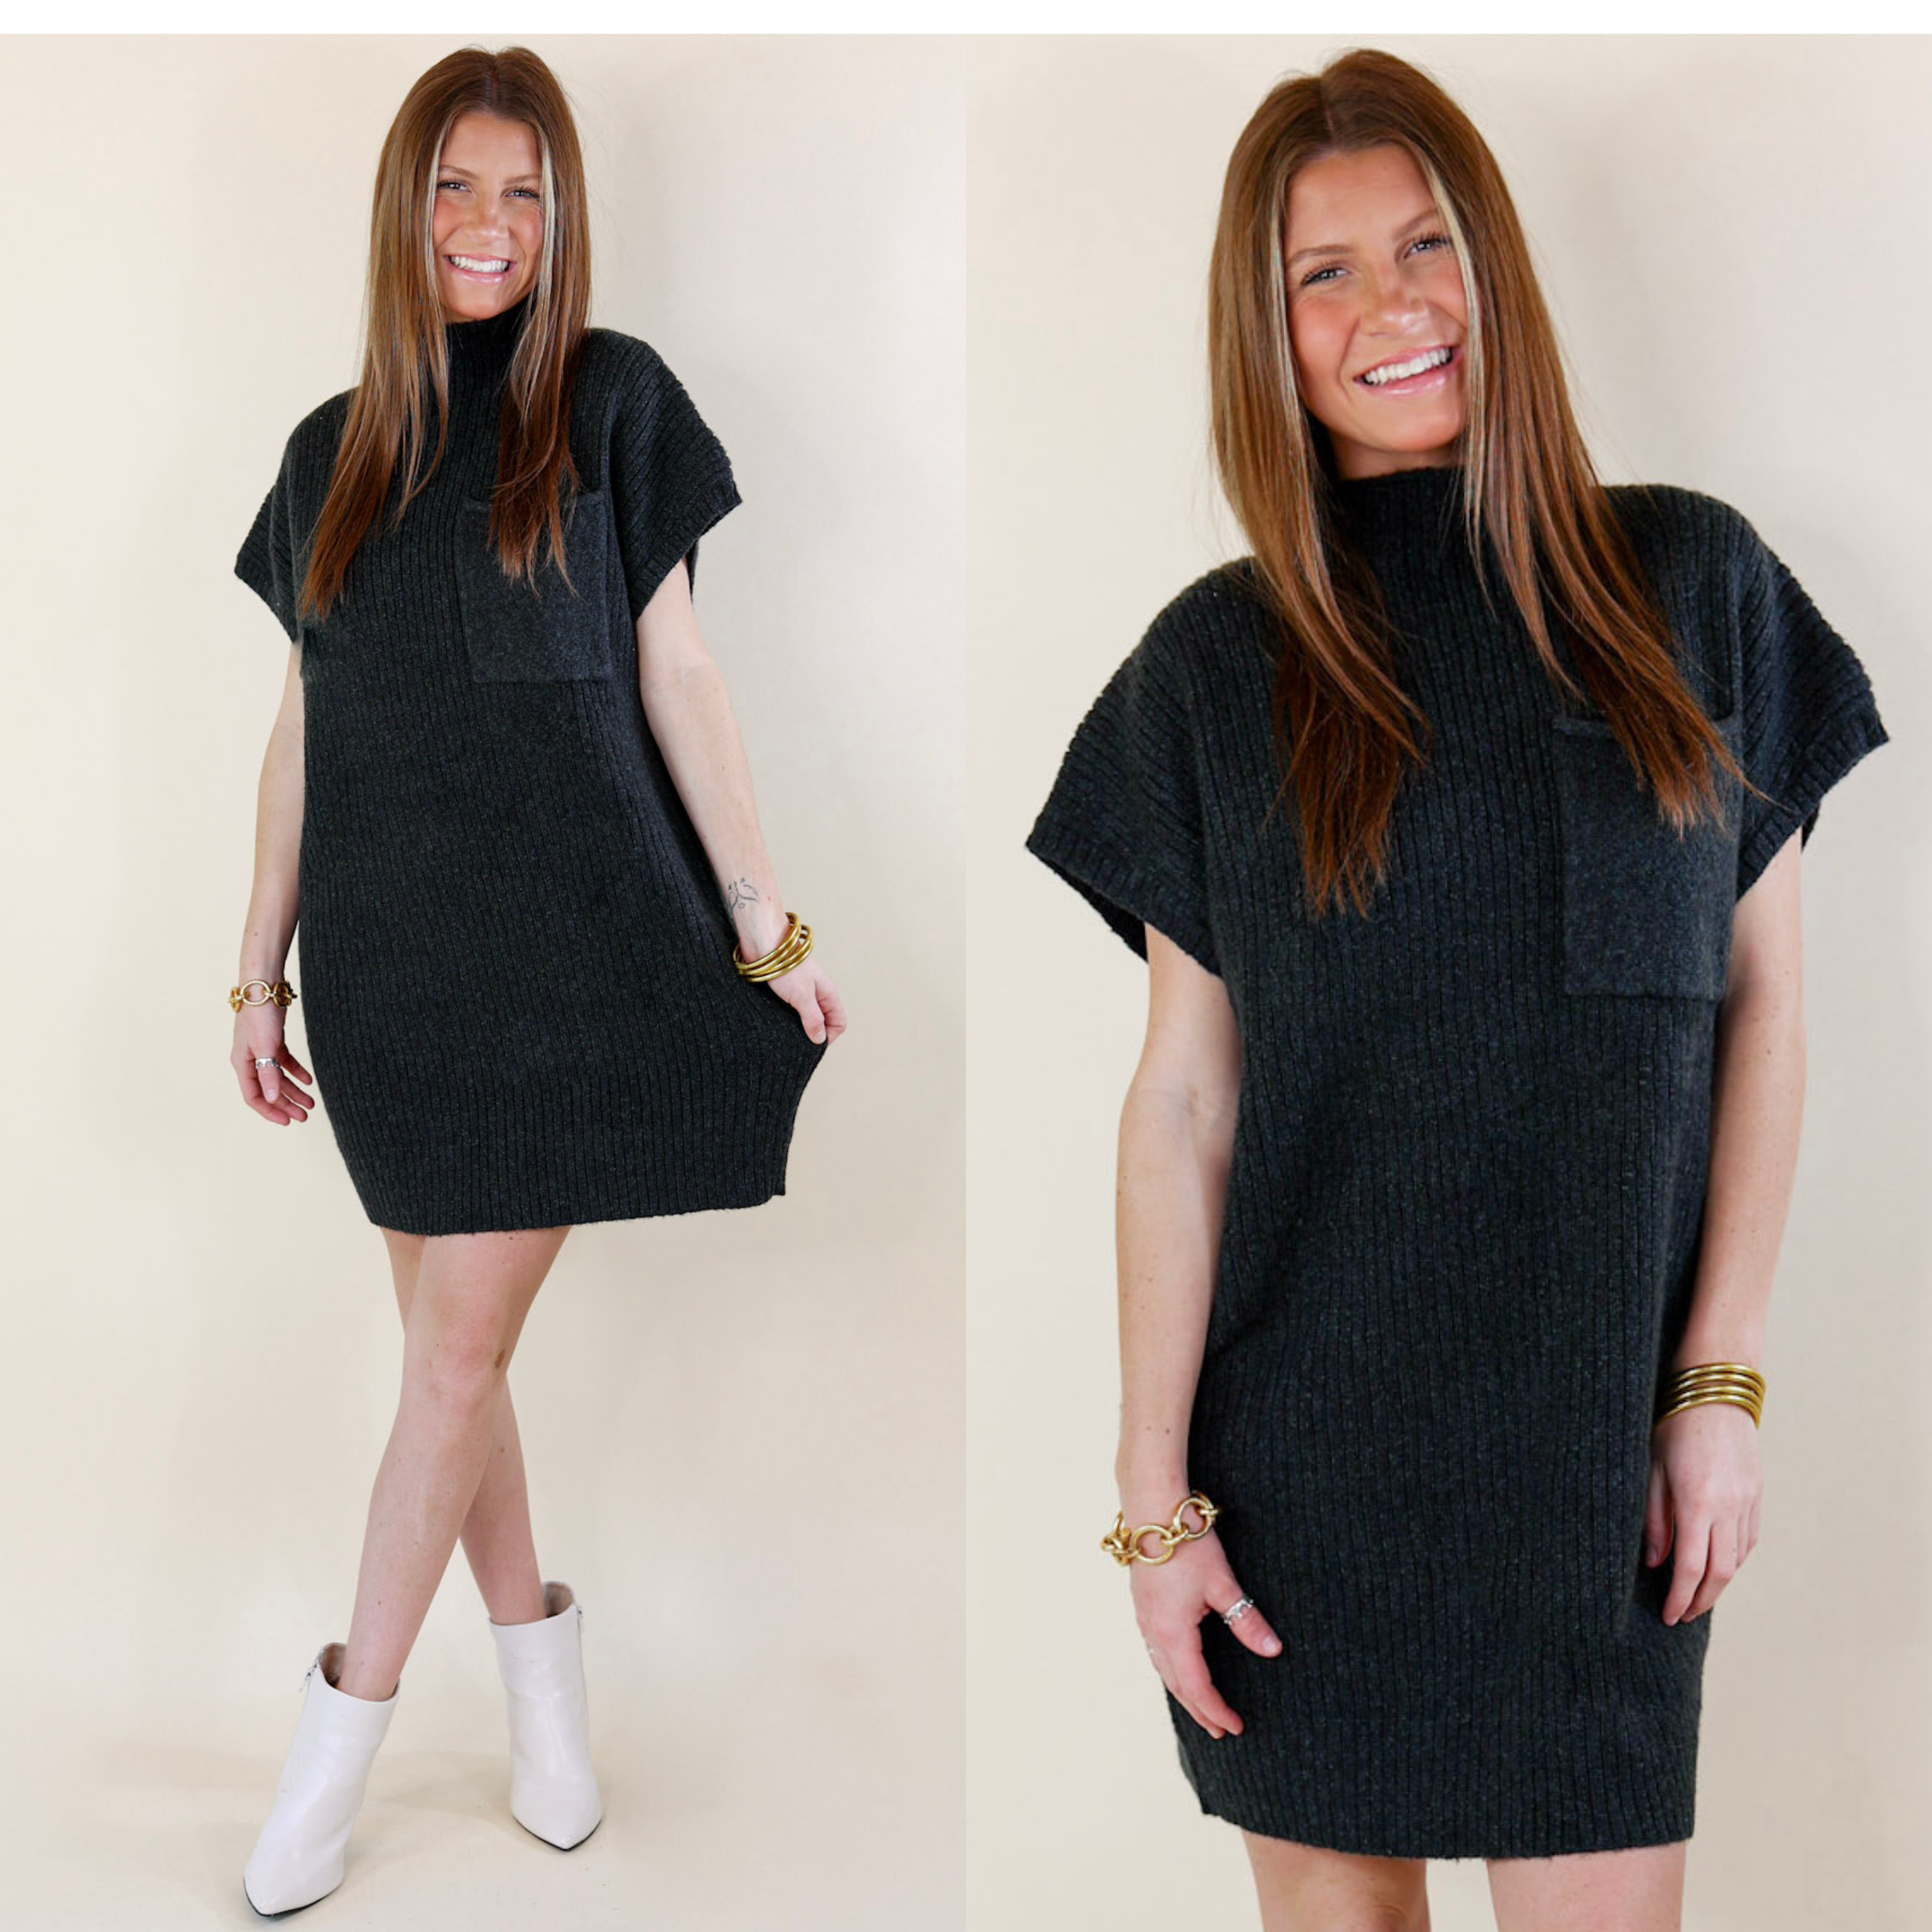 In the picture the model is wearing a cap sleeve sweater dress in charcoal black with a white background 